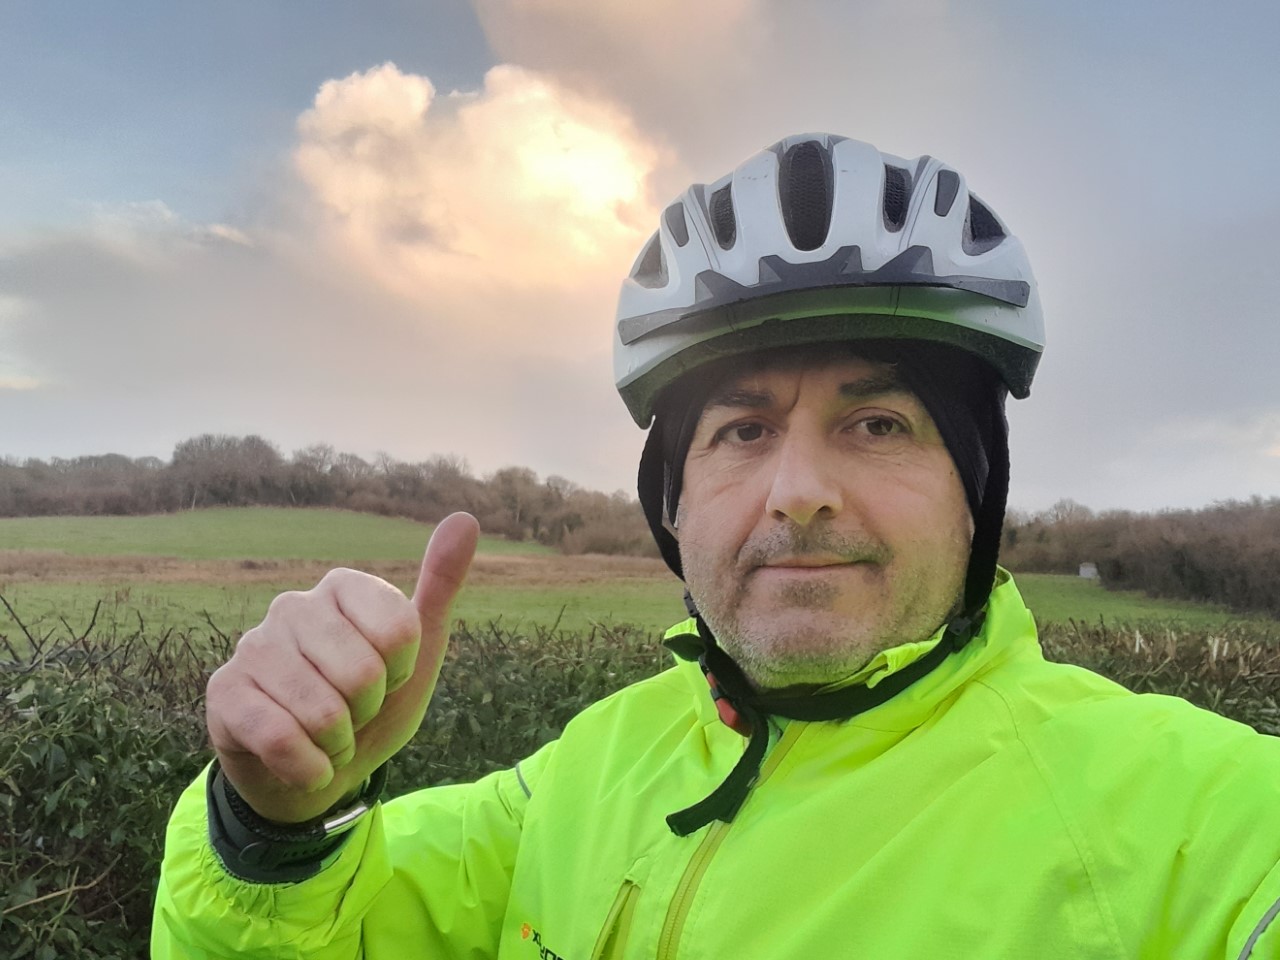 Solo Ride February 17th - 28 Day Active Challenge